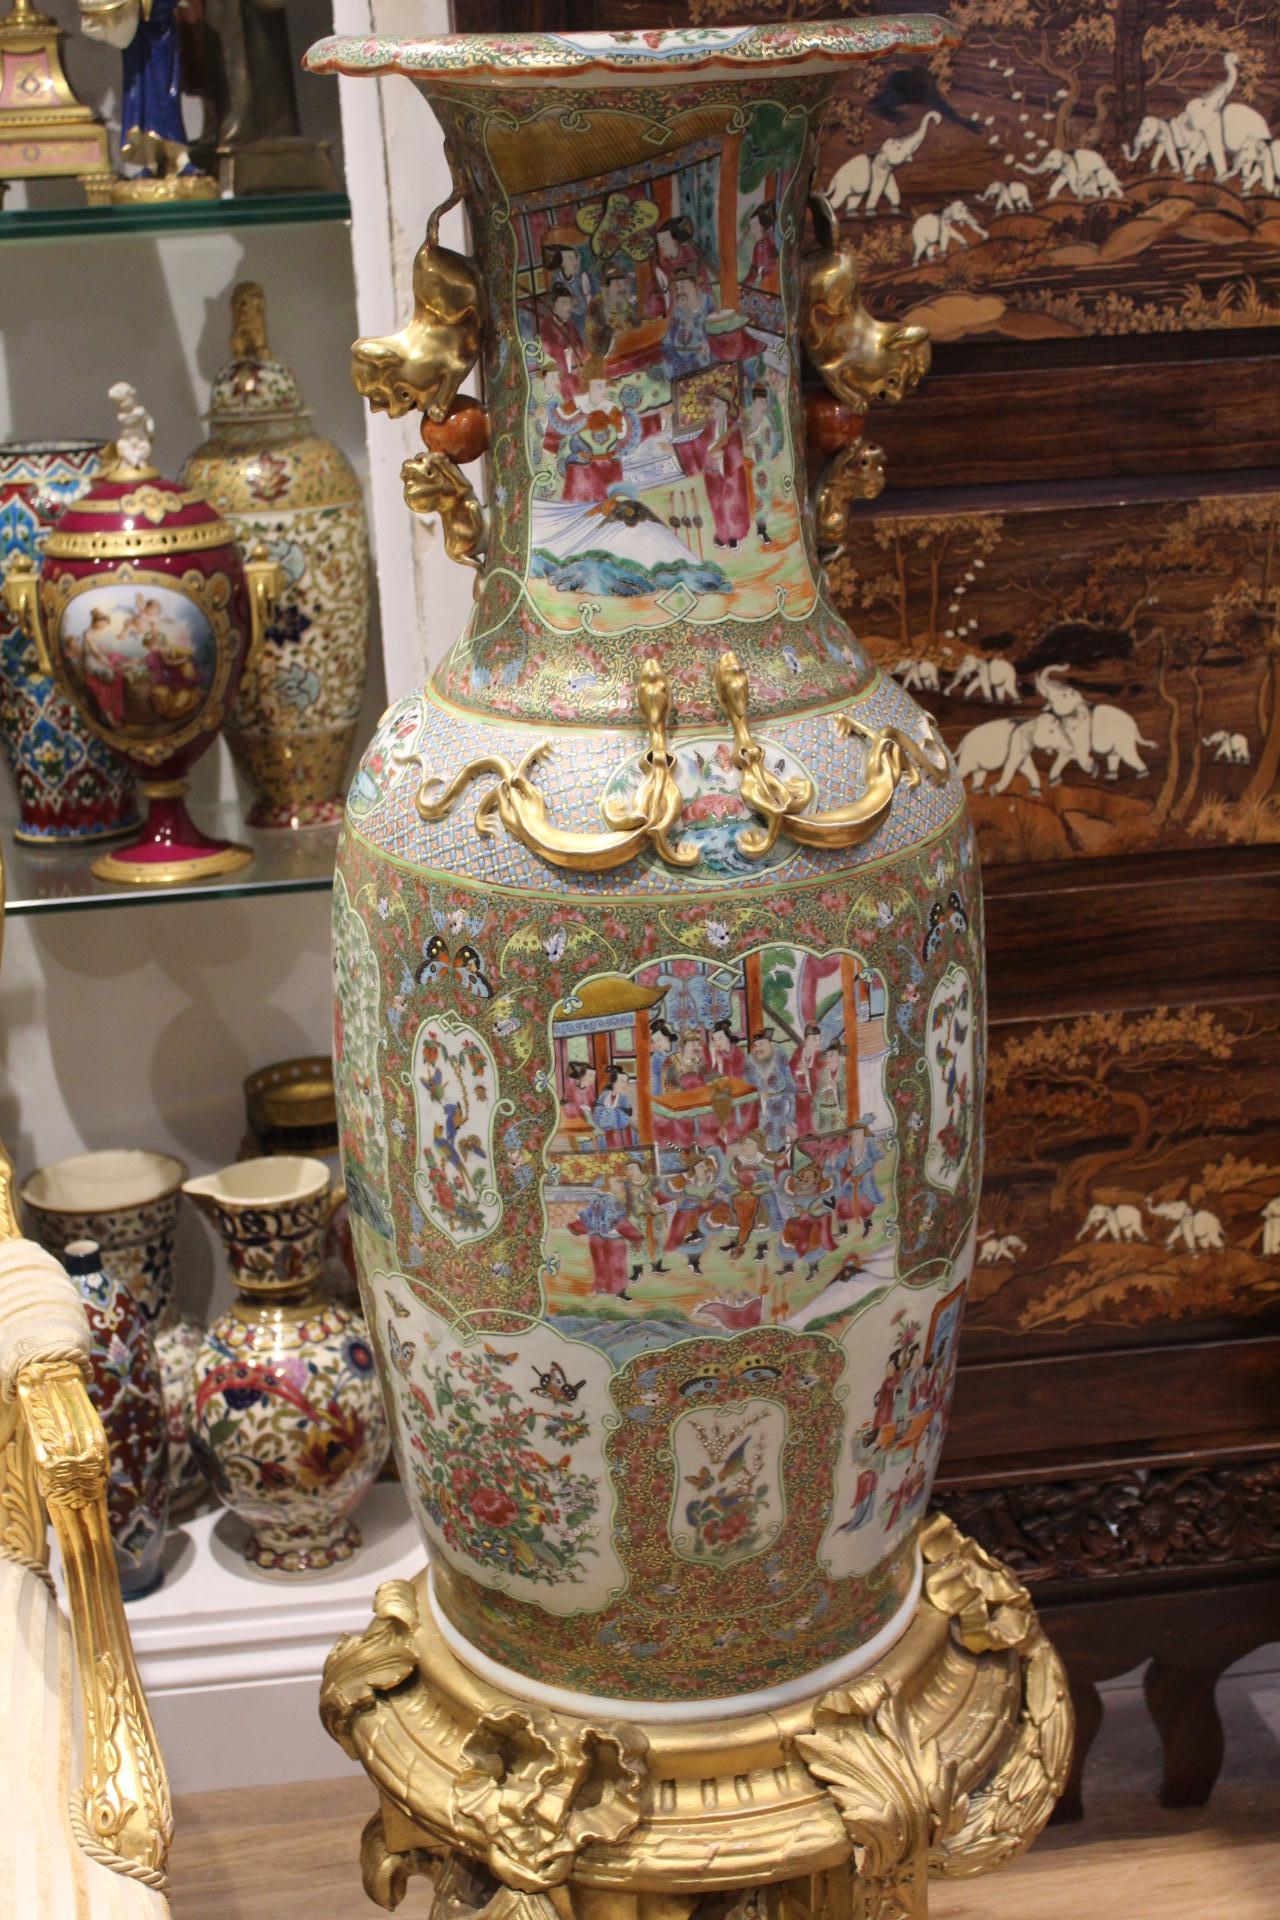 A large pair of early 19th century Chinese canton famille rose porcelain vases with twin gilt kylin handles and applied gilt relief dragons, the body decorated with vignette panels depicting court scenes together with birds and butterfly's amongst